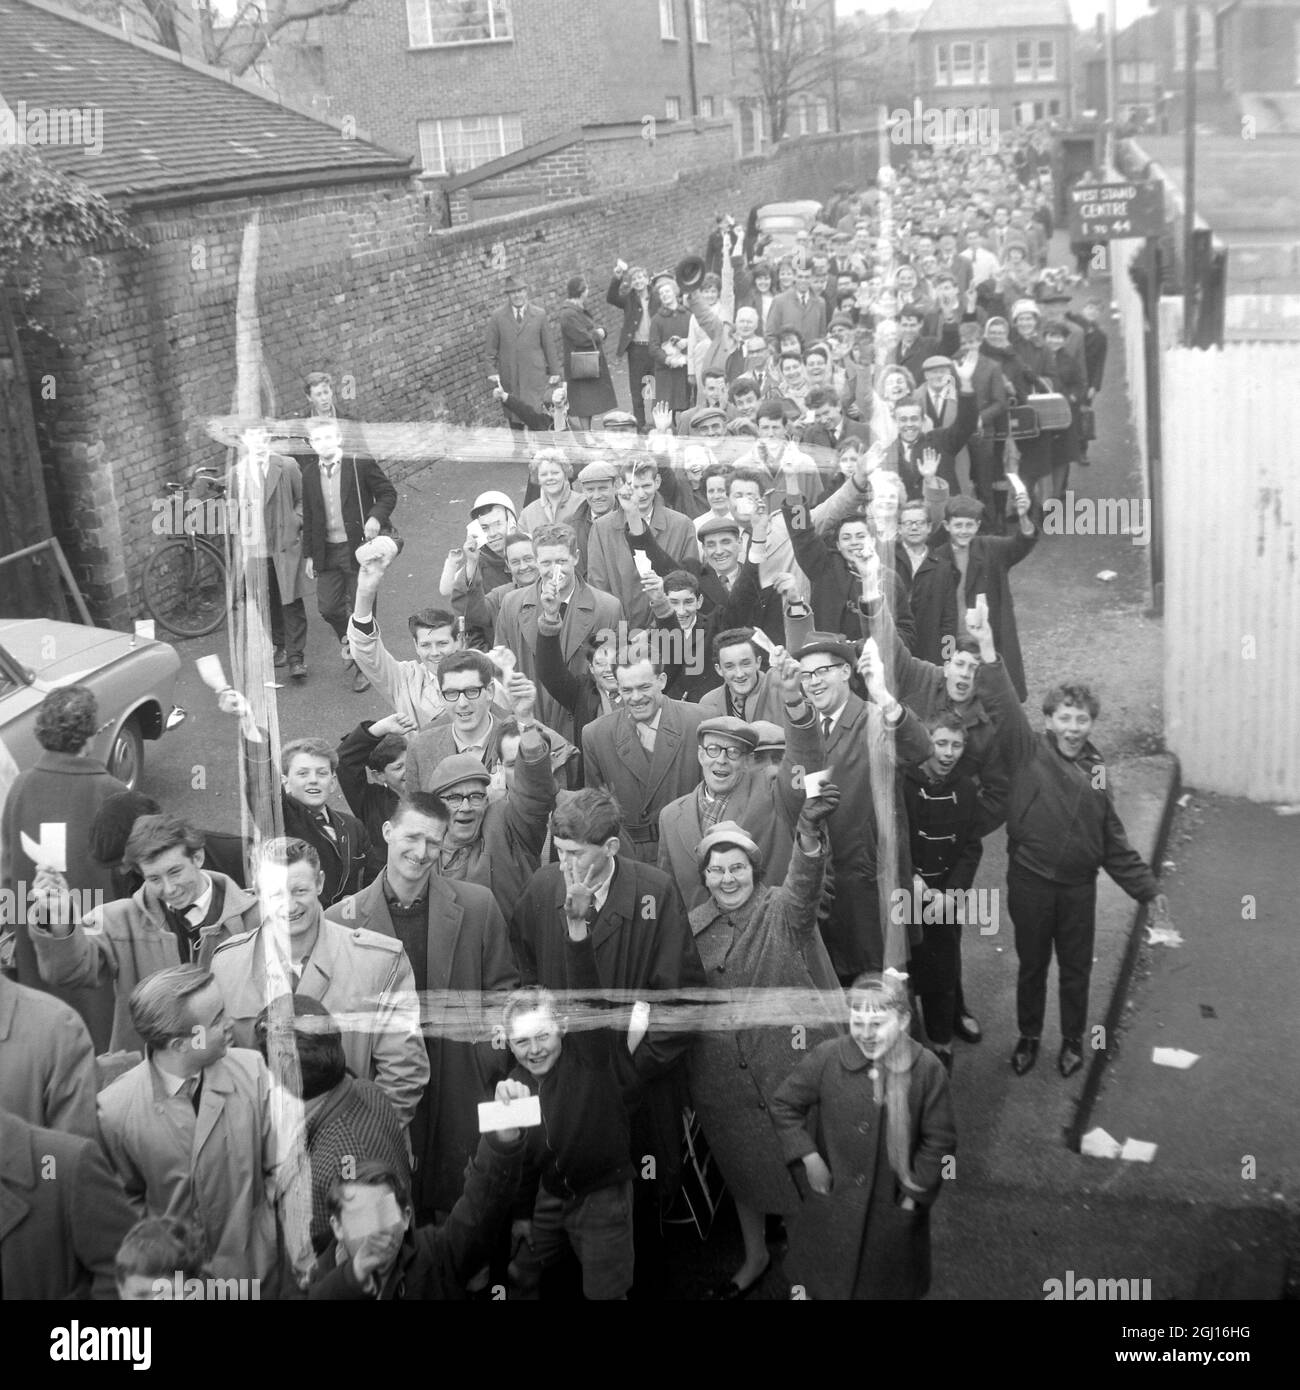 FOOTBALL FANS WAVE TICKETS FOR SOUTHAMPTON V MANCHESTER UNITED ; 16 APRILE 1963 Foto Stock